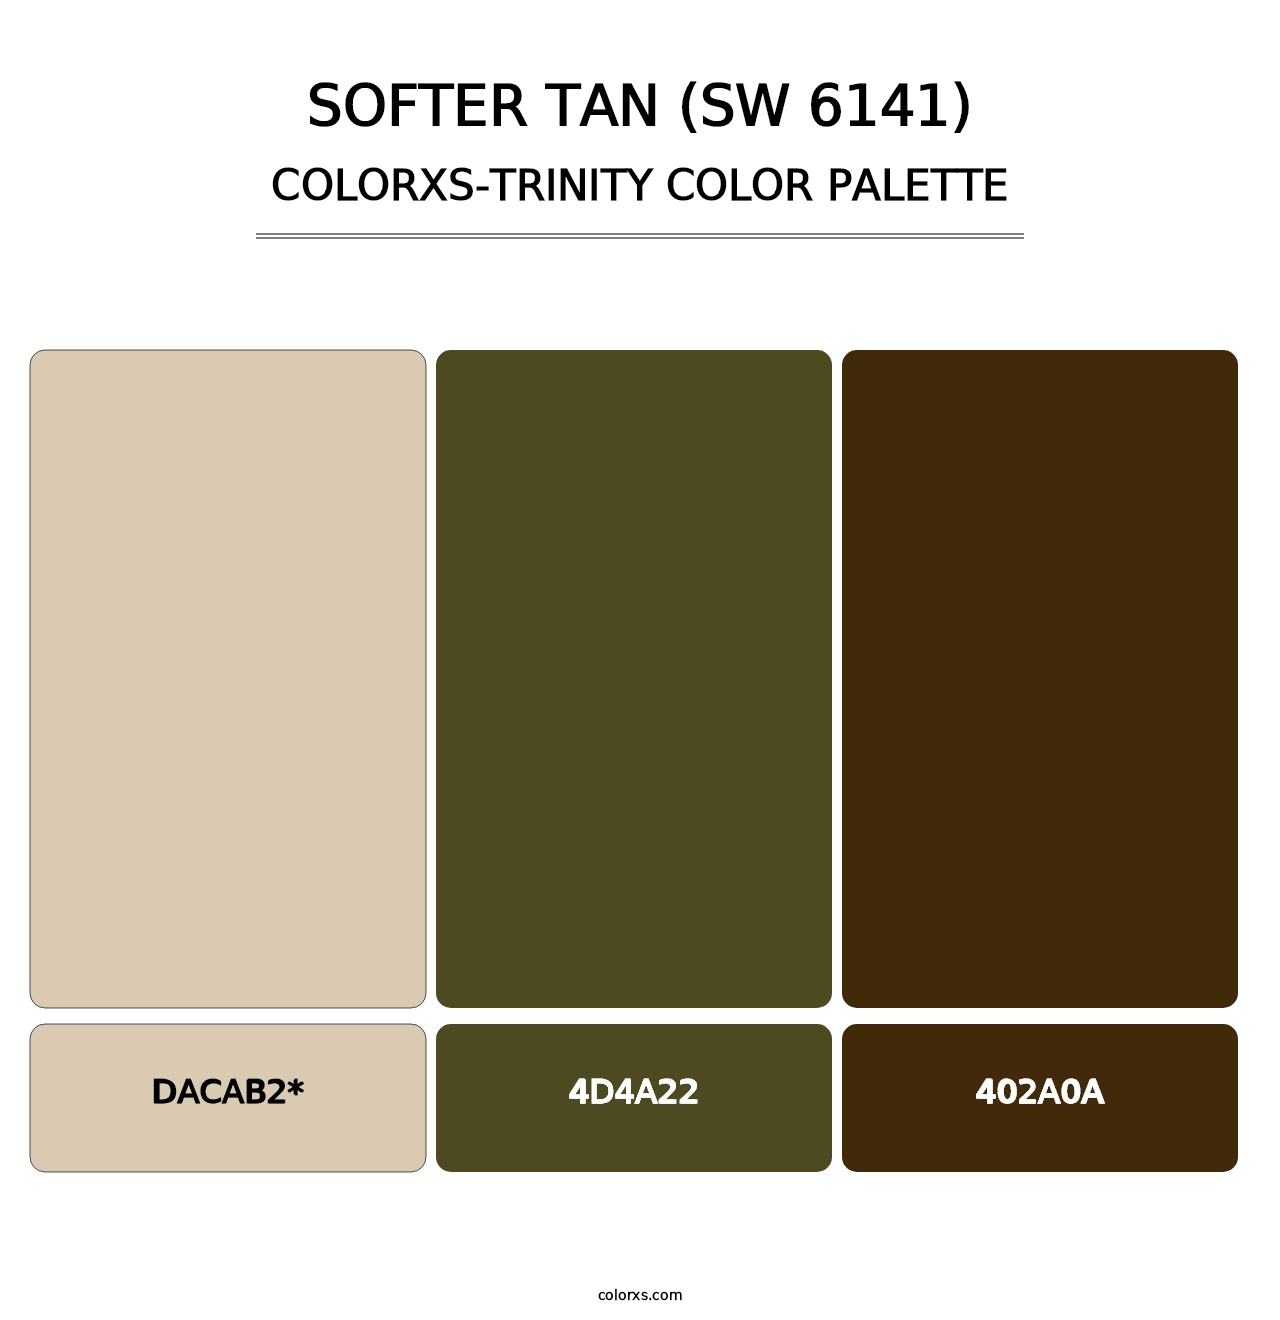 Softer Tan (SW 6141) - Colorxs Trinity Palette